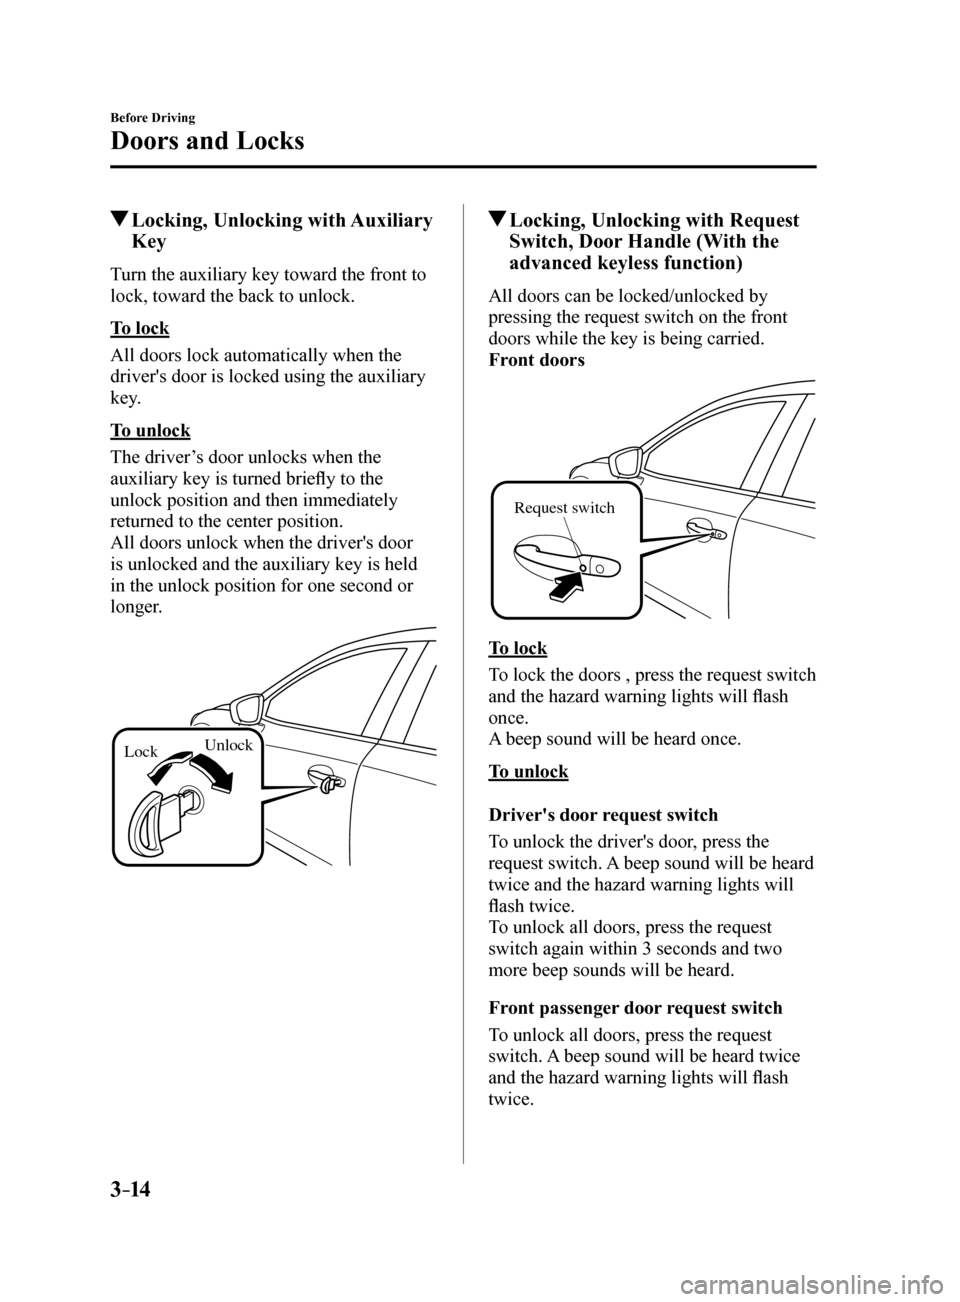 MAZDA MODEL 6 2017  Owners Manual (in English) 3–14
Before Driving
Doors and Locks
 Locking, Unlocking with Auxiliary 
Key
Turn the auxiliary key toward the front to 
lock, toward the back to unlock.
To lock
All doors lock automatically when the